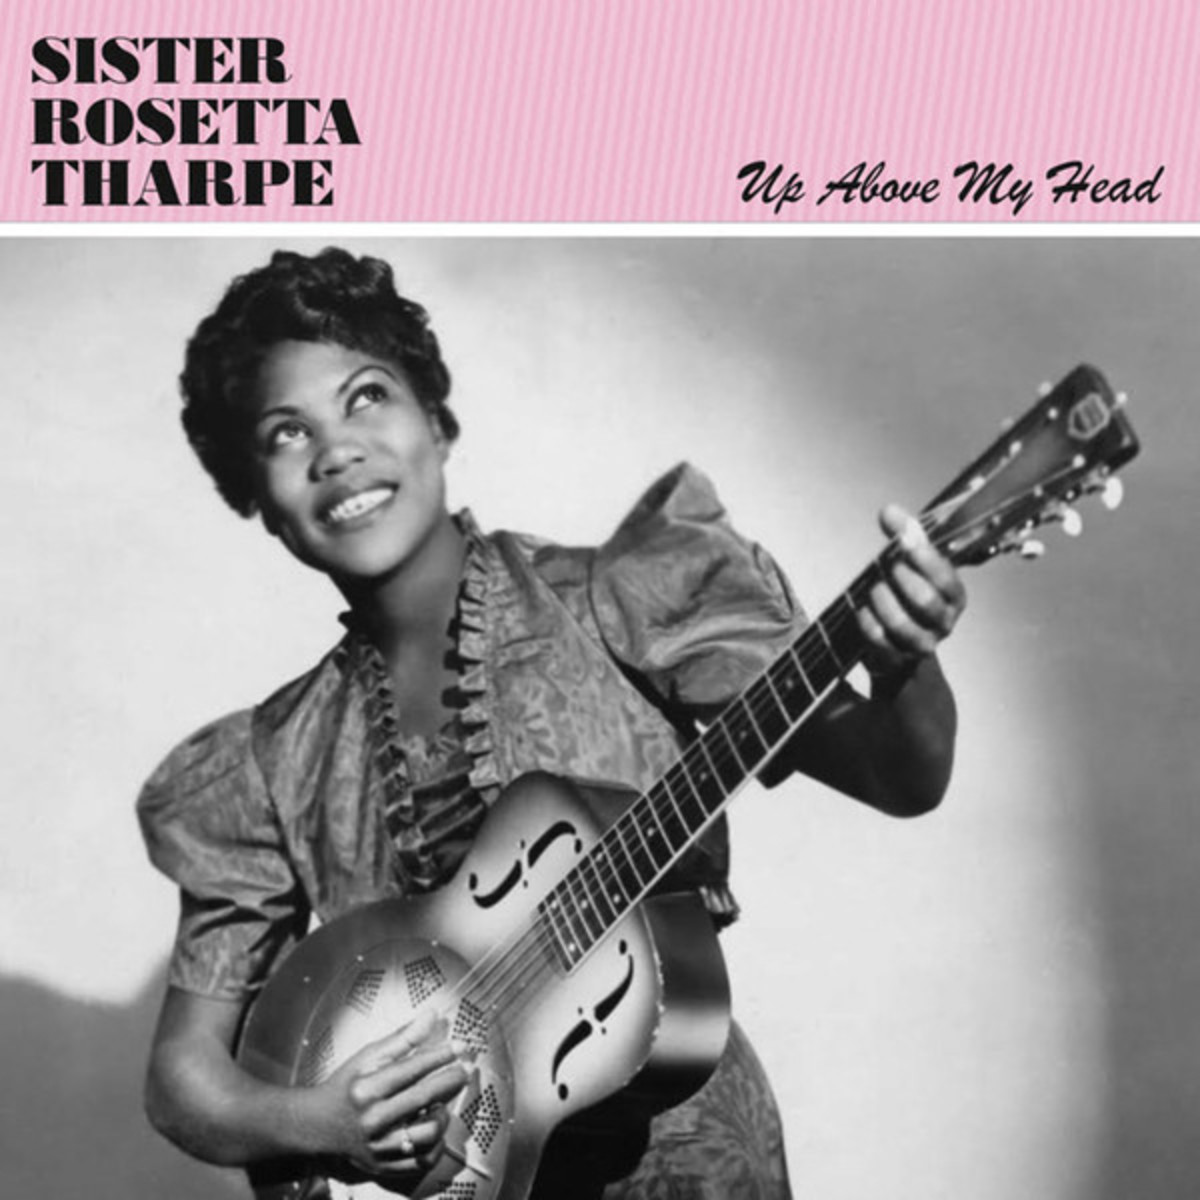 Sister Rosetta Tharpe – Up Above My Head 2018 compilation